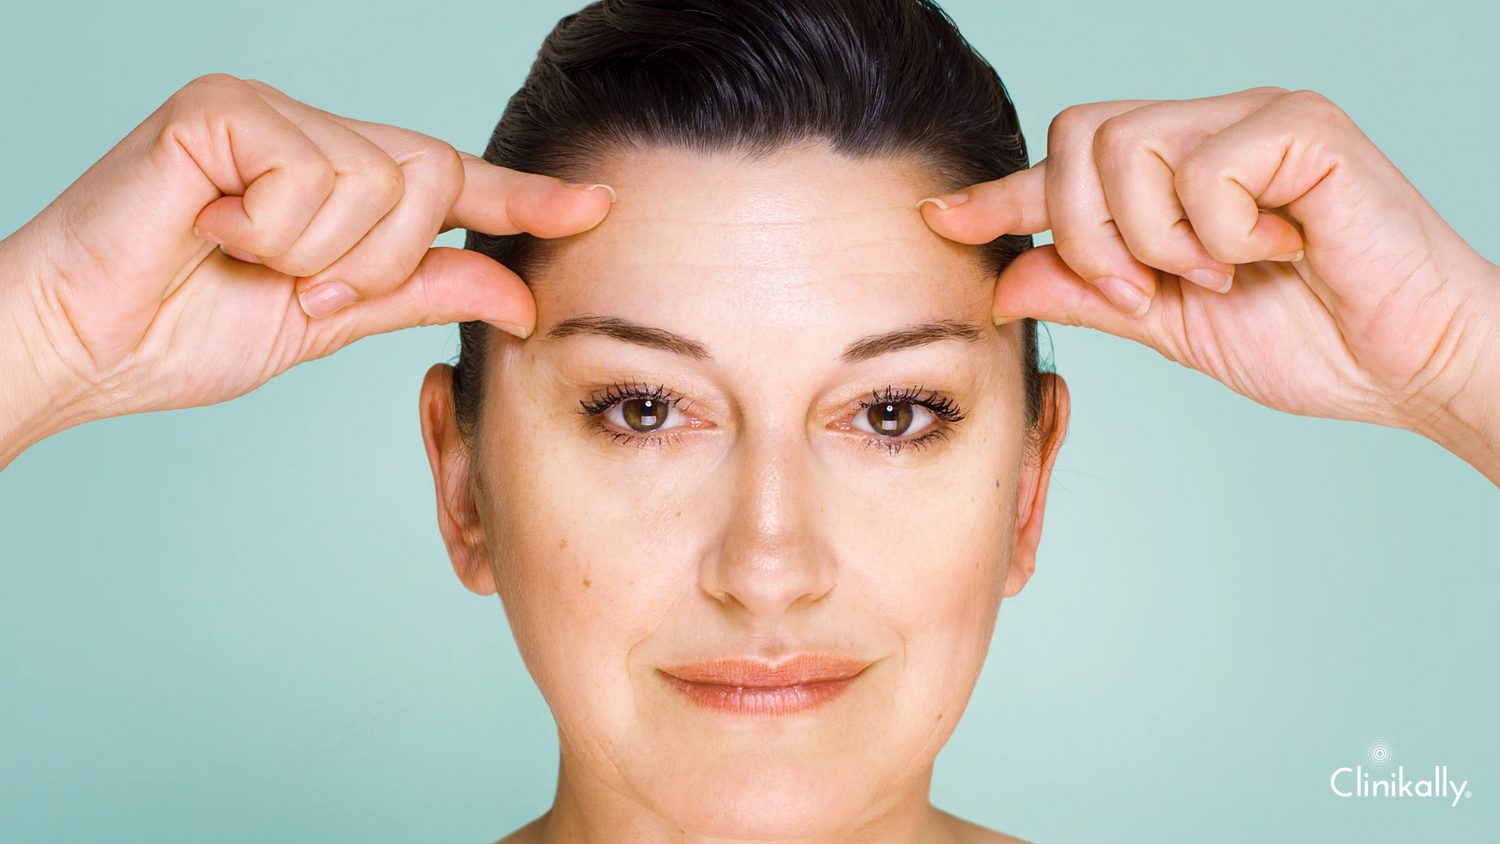 Retin-A for Wrinkles and Aging Skin: How to Use it Safely and Effectively